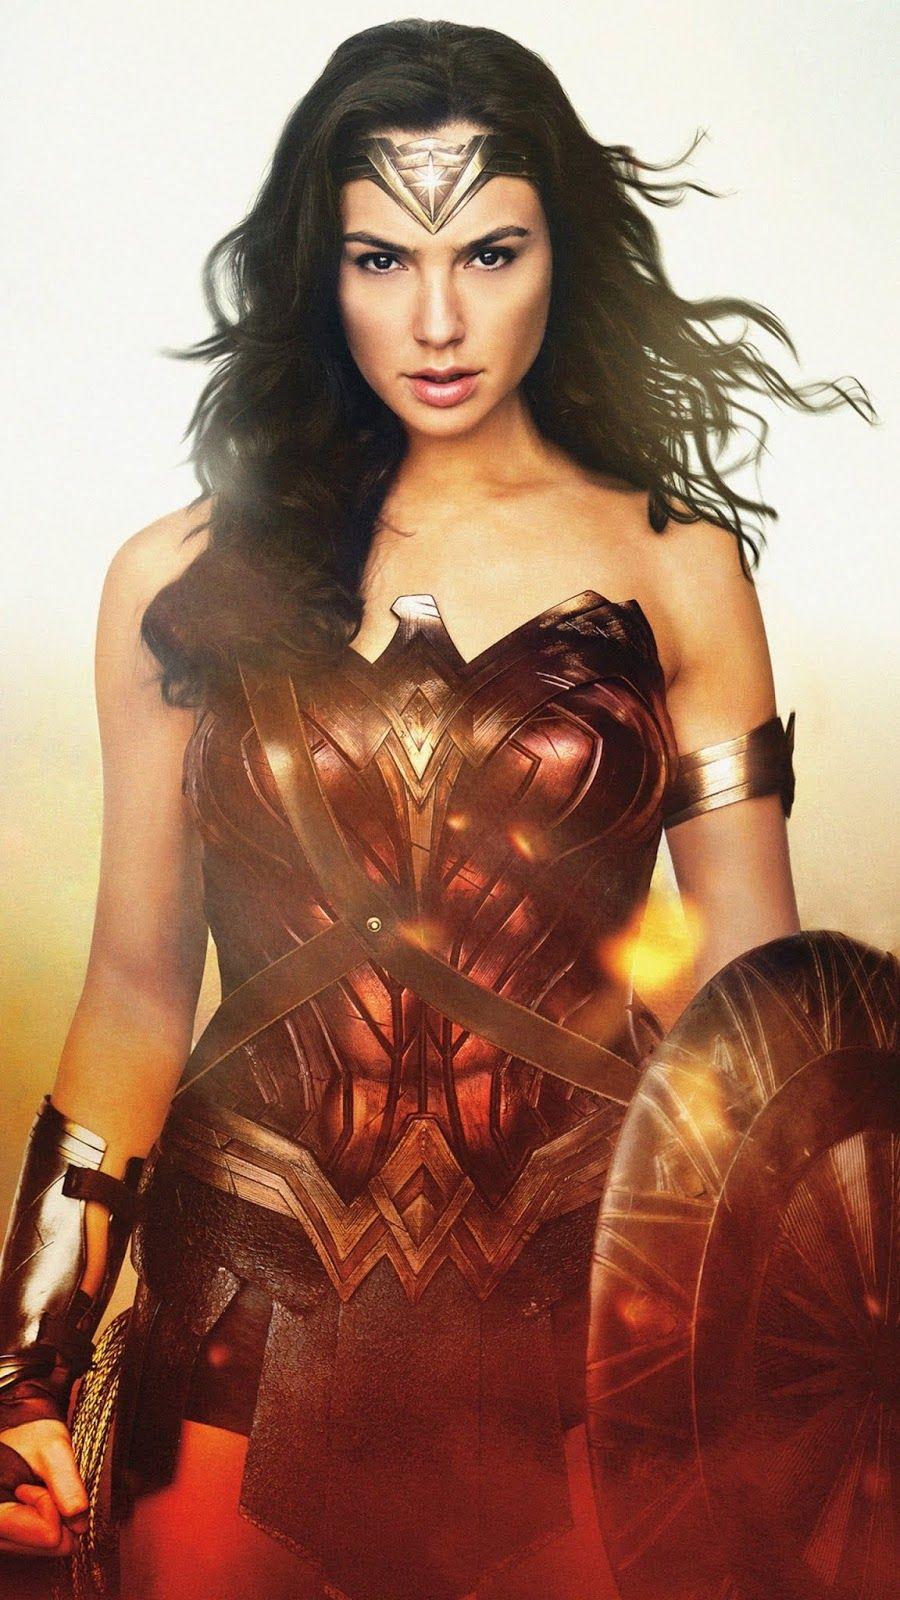 Wonder Woman HD wallpaper and full HD background image